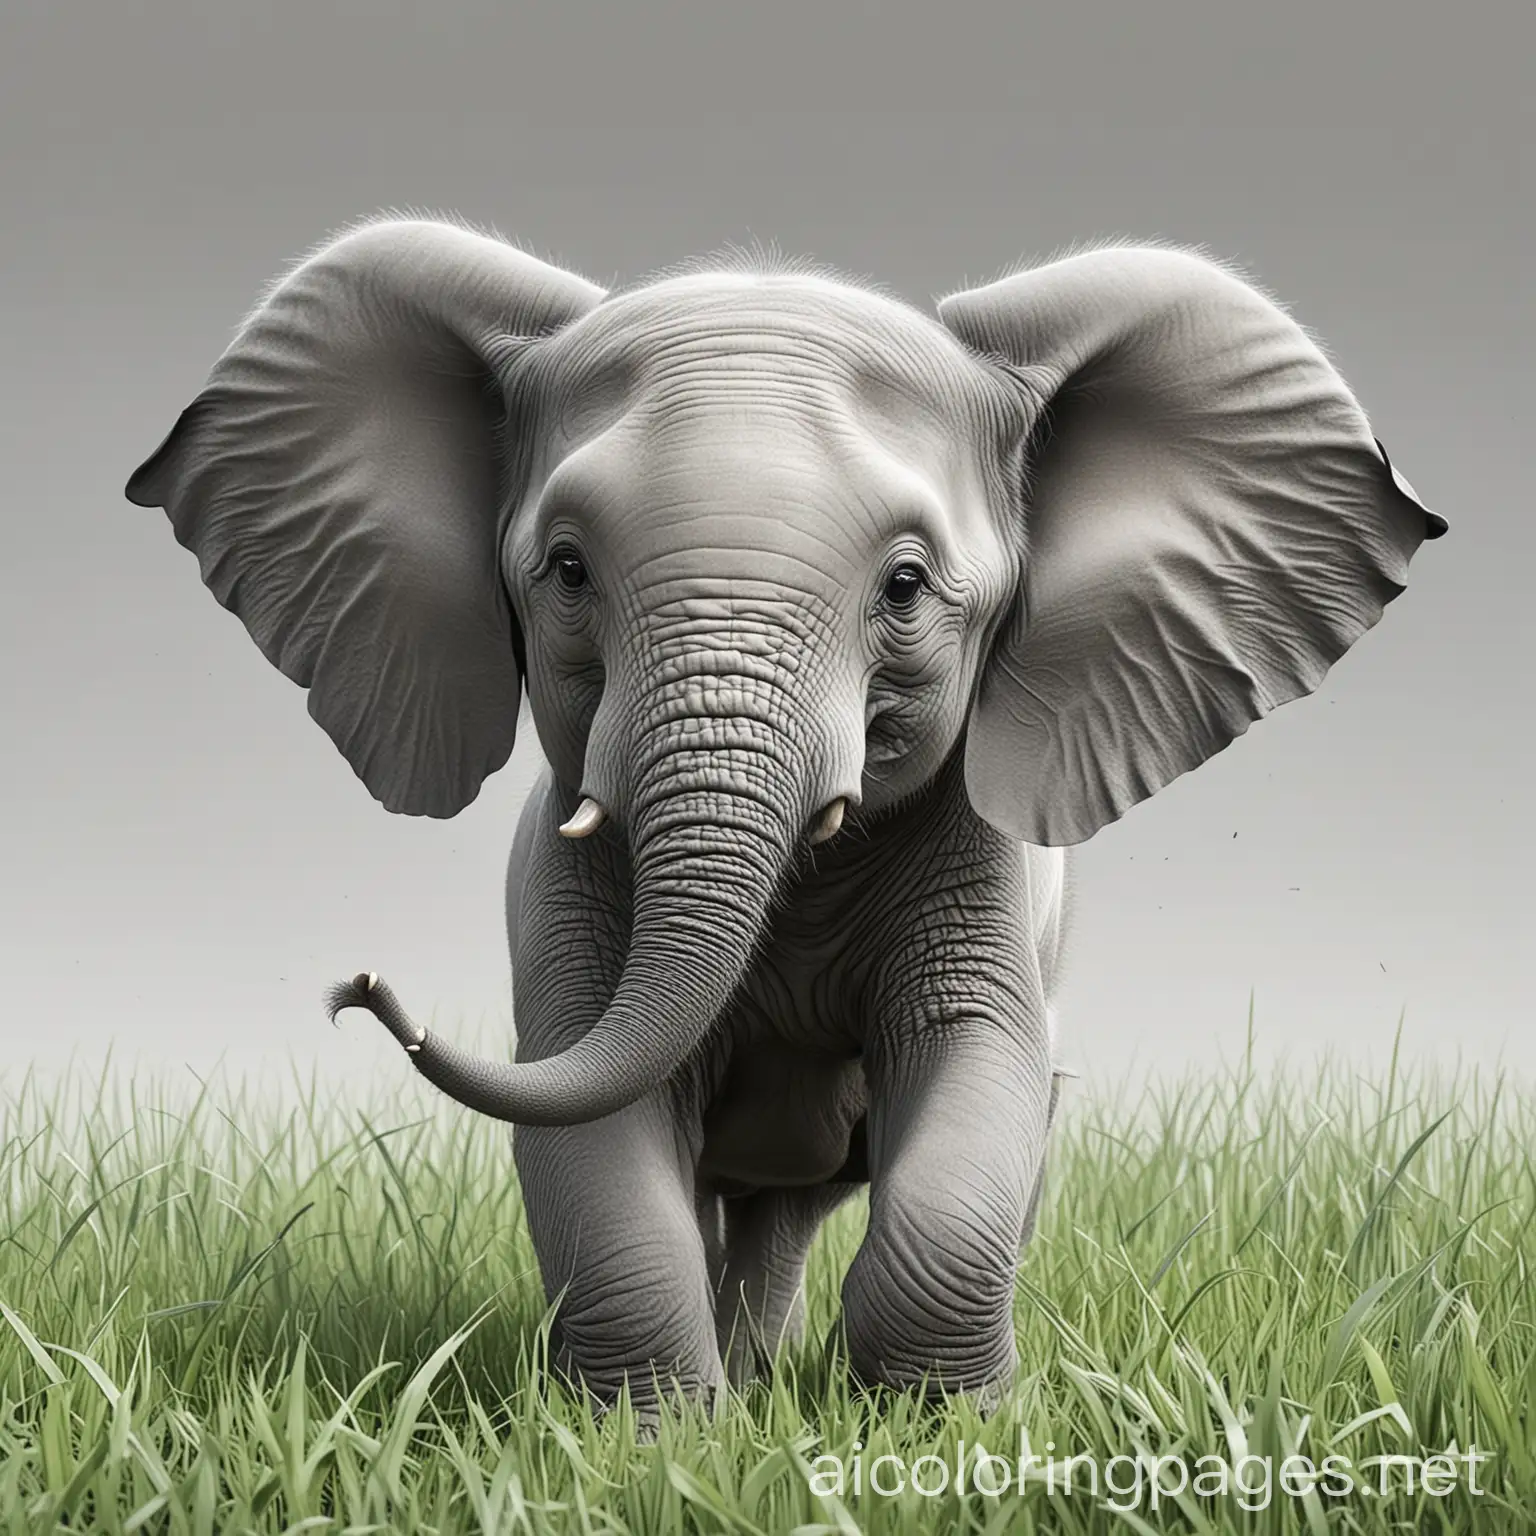 A beautiful gray baby elephant playing in green grass having lots of fun, Coloring Page, black and white, line art, white background, Simplicity, Ample White Space. The background of the coloring page is plain white to make it easy for young children to color within the lines. The outlines of all the subjects are easy to distinguish, making it simple for kids to color without too much difficulty